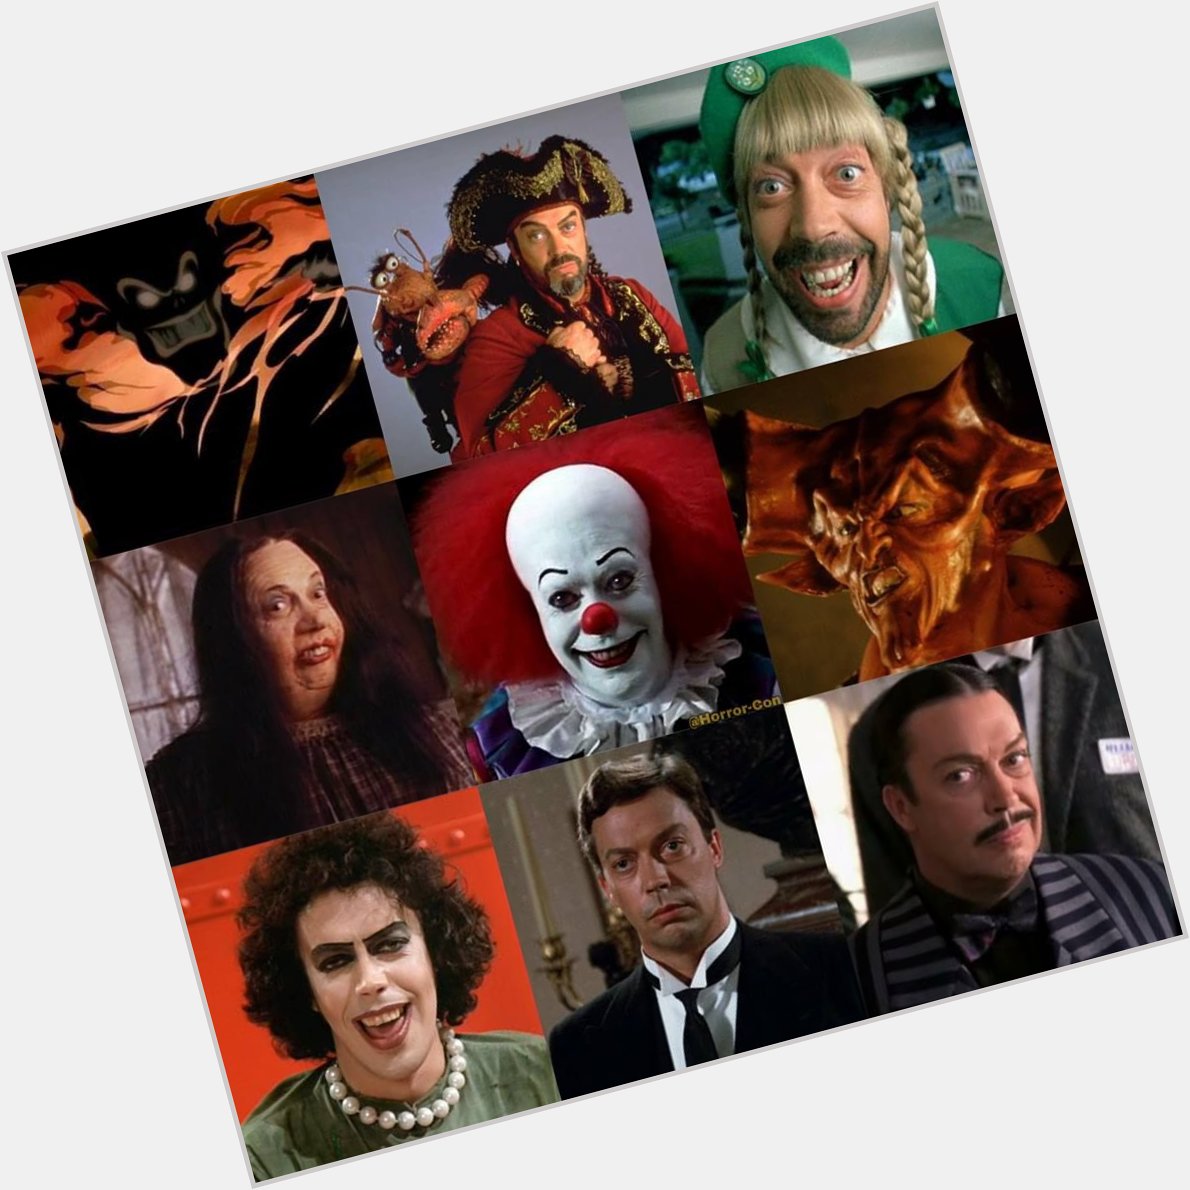 Happy (early) birthday to Tim Curry! What a Legend! 